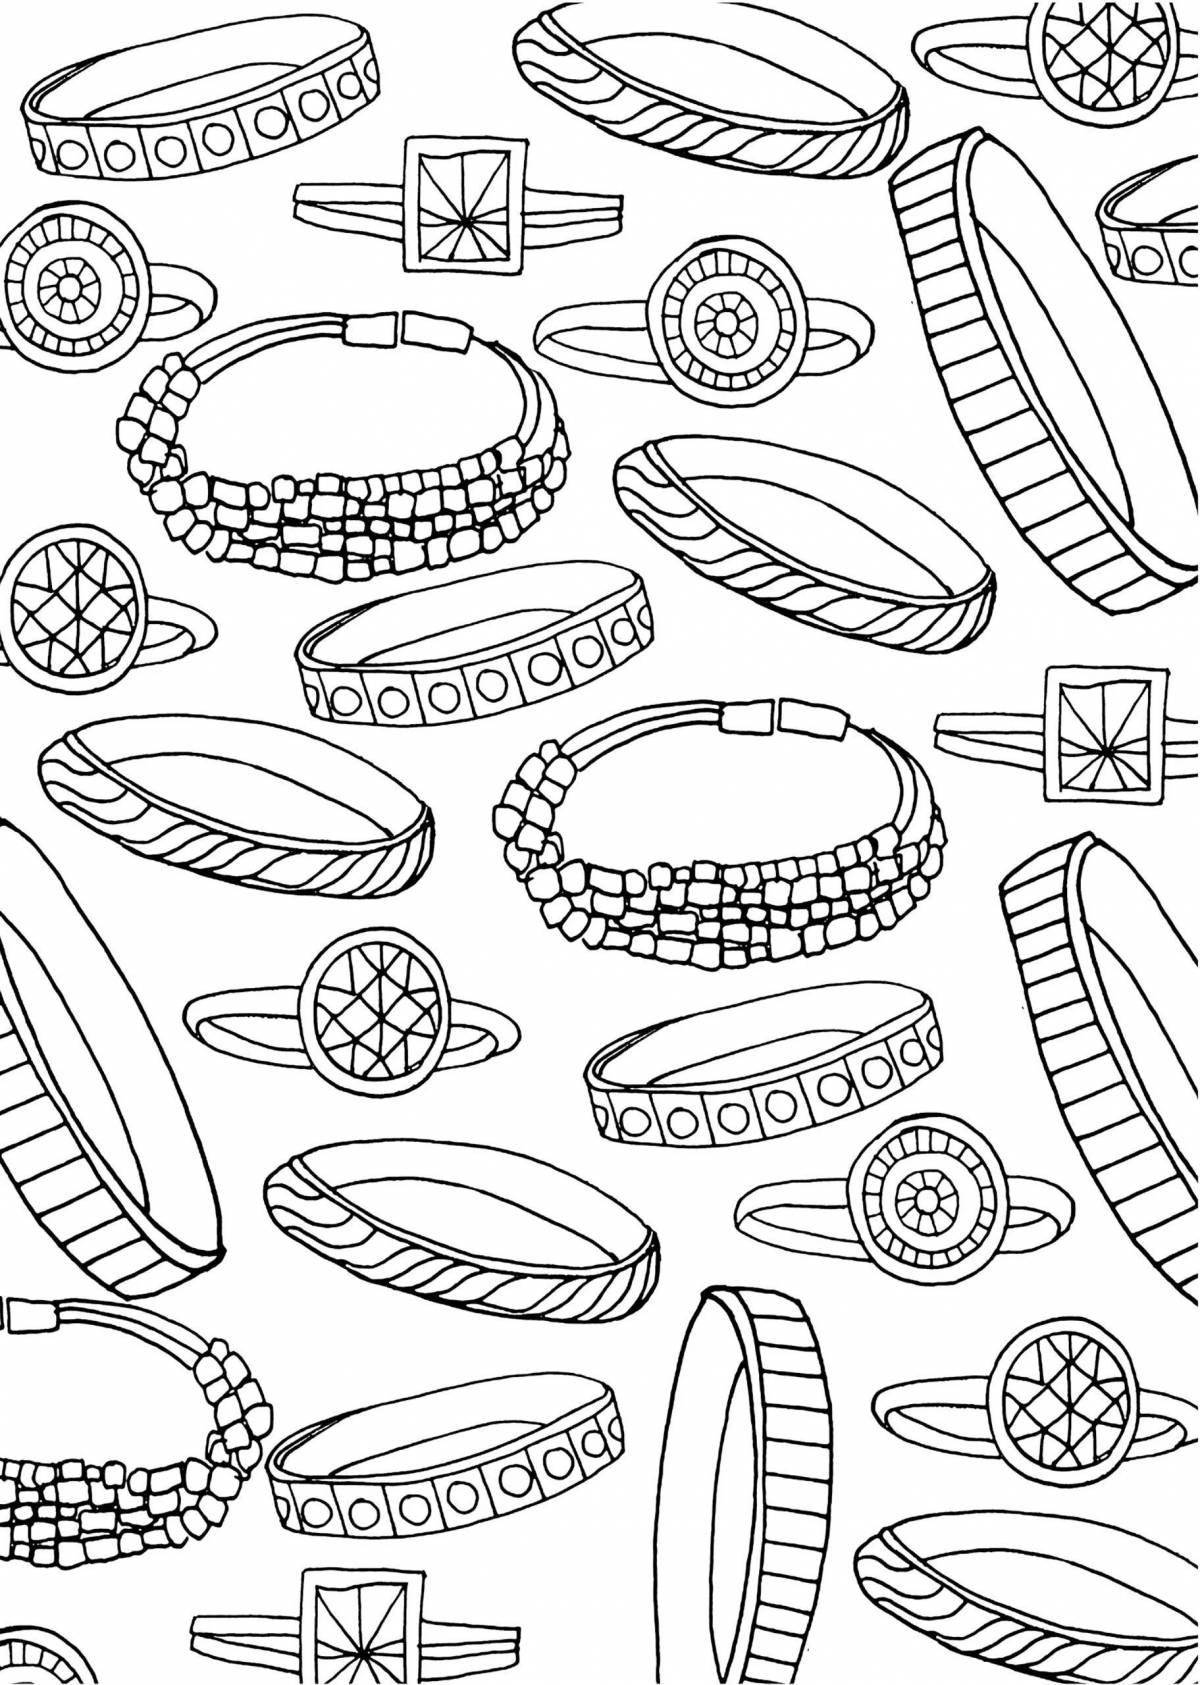 Coloring page magic rings for girls